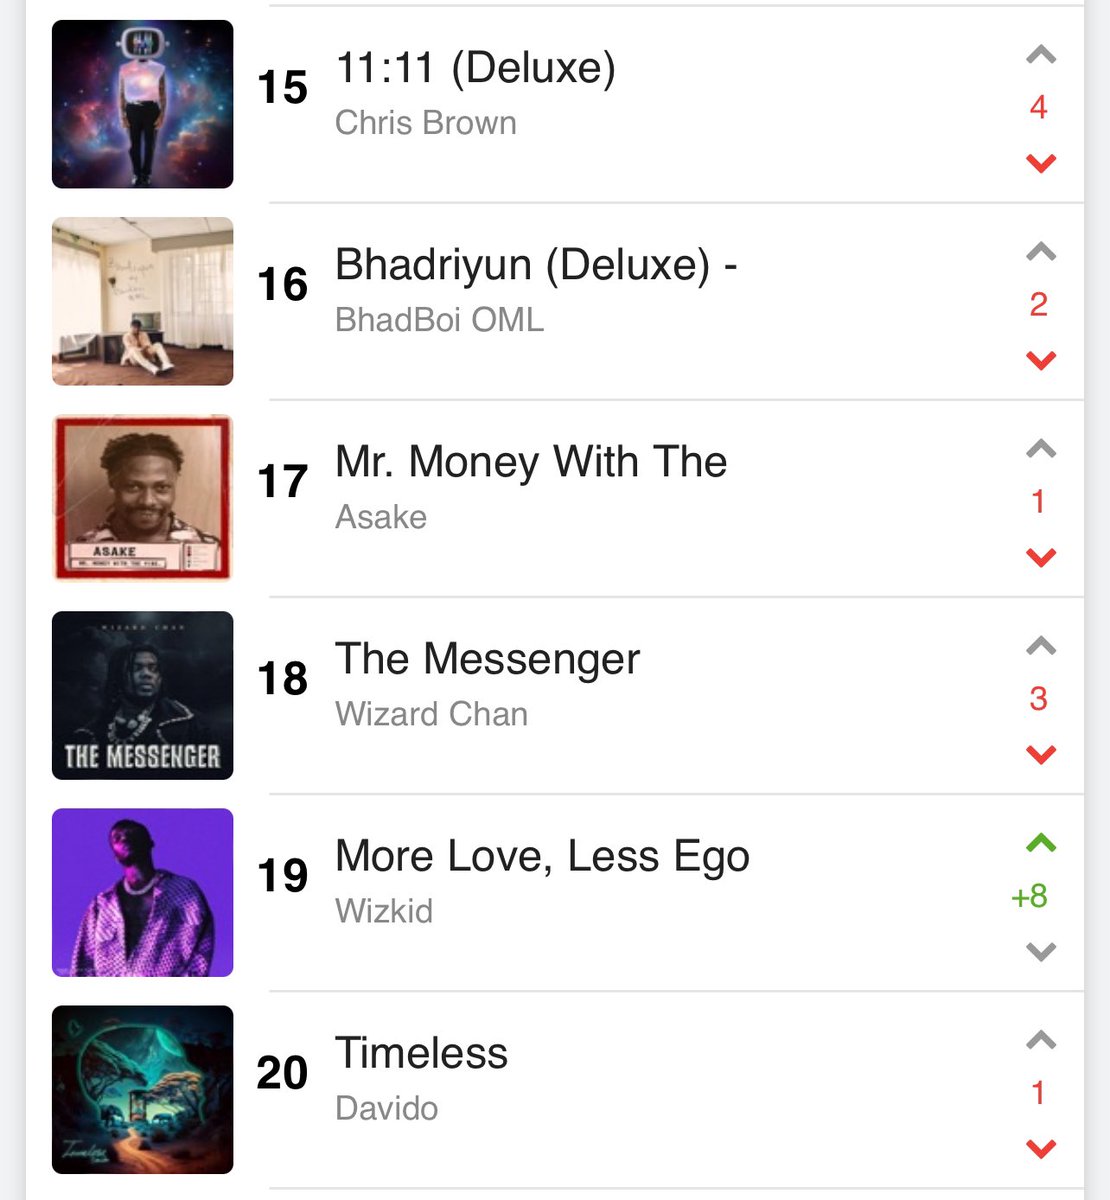 Nigeria Apple Music chart 🇳🇬 #8. S2 [+5] #13. Made In Lagos [+5] #19. More Love Less Ego [+8] Wizkid is the only artist charting (3) projects in Top 20.